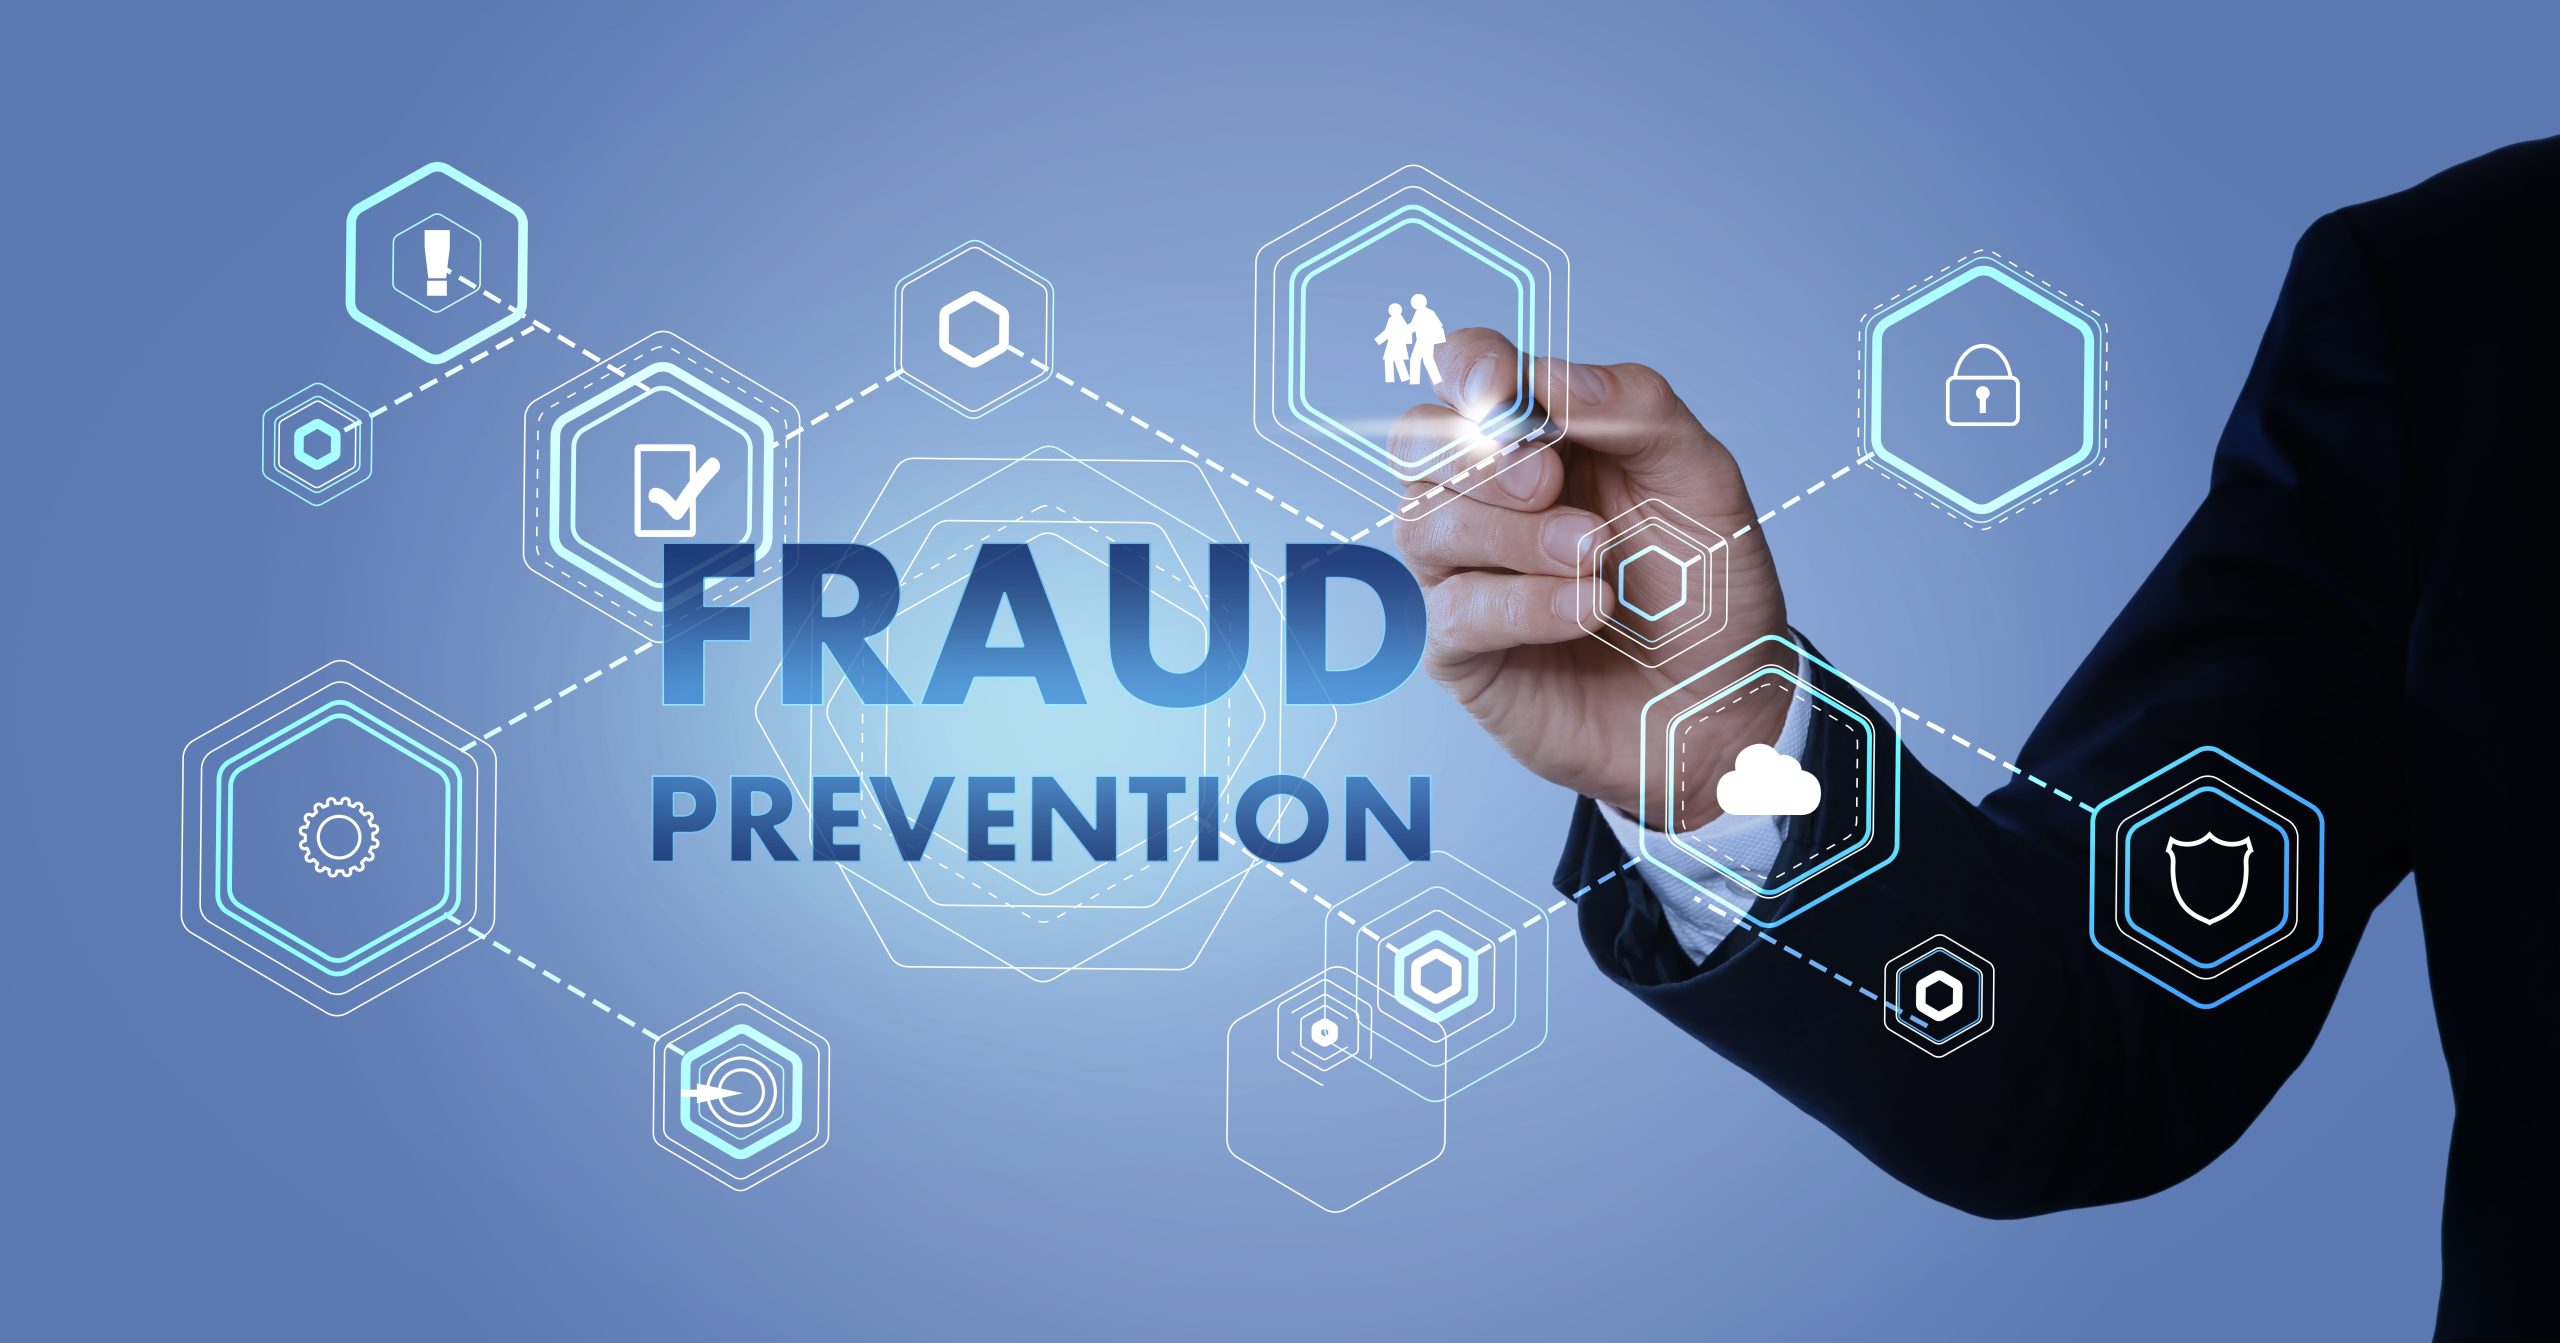 Stop fraud in its tracks. Learn how to protect yourself!